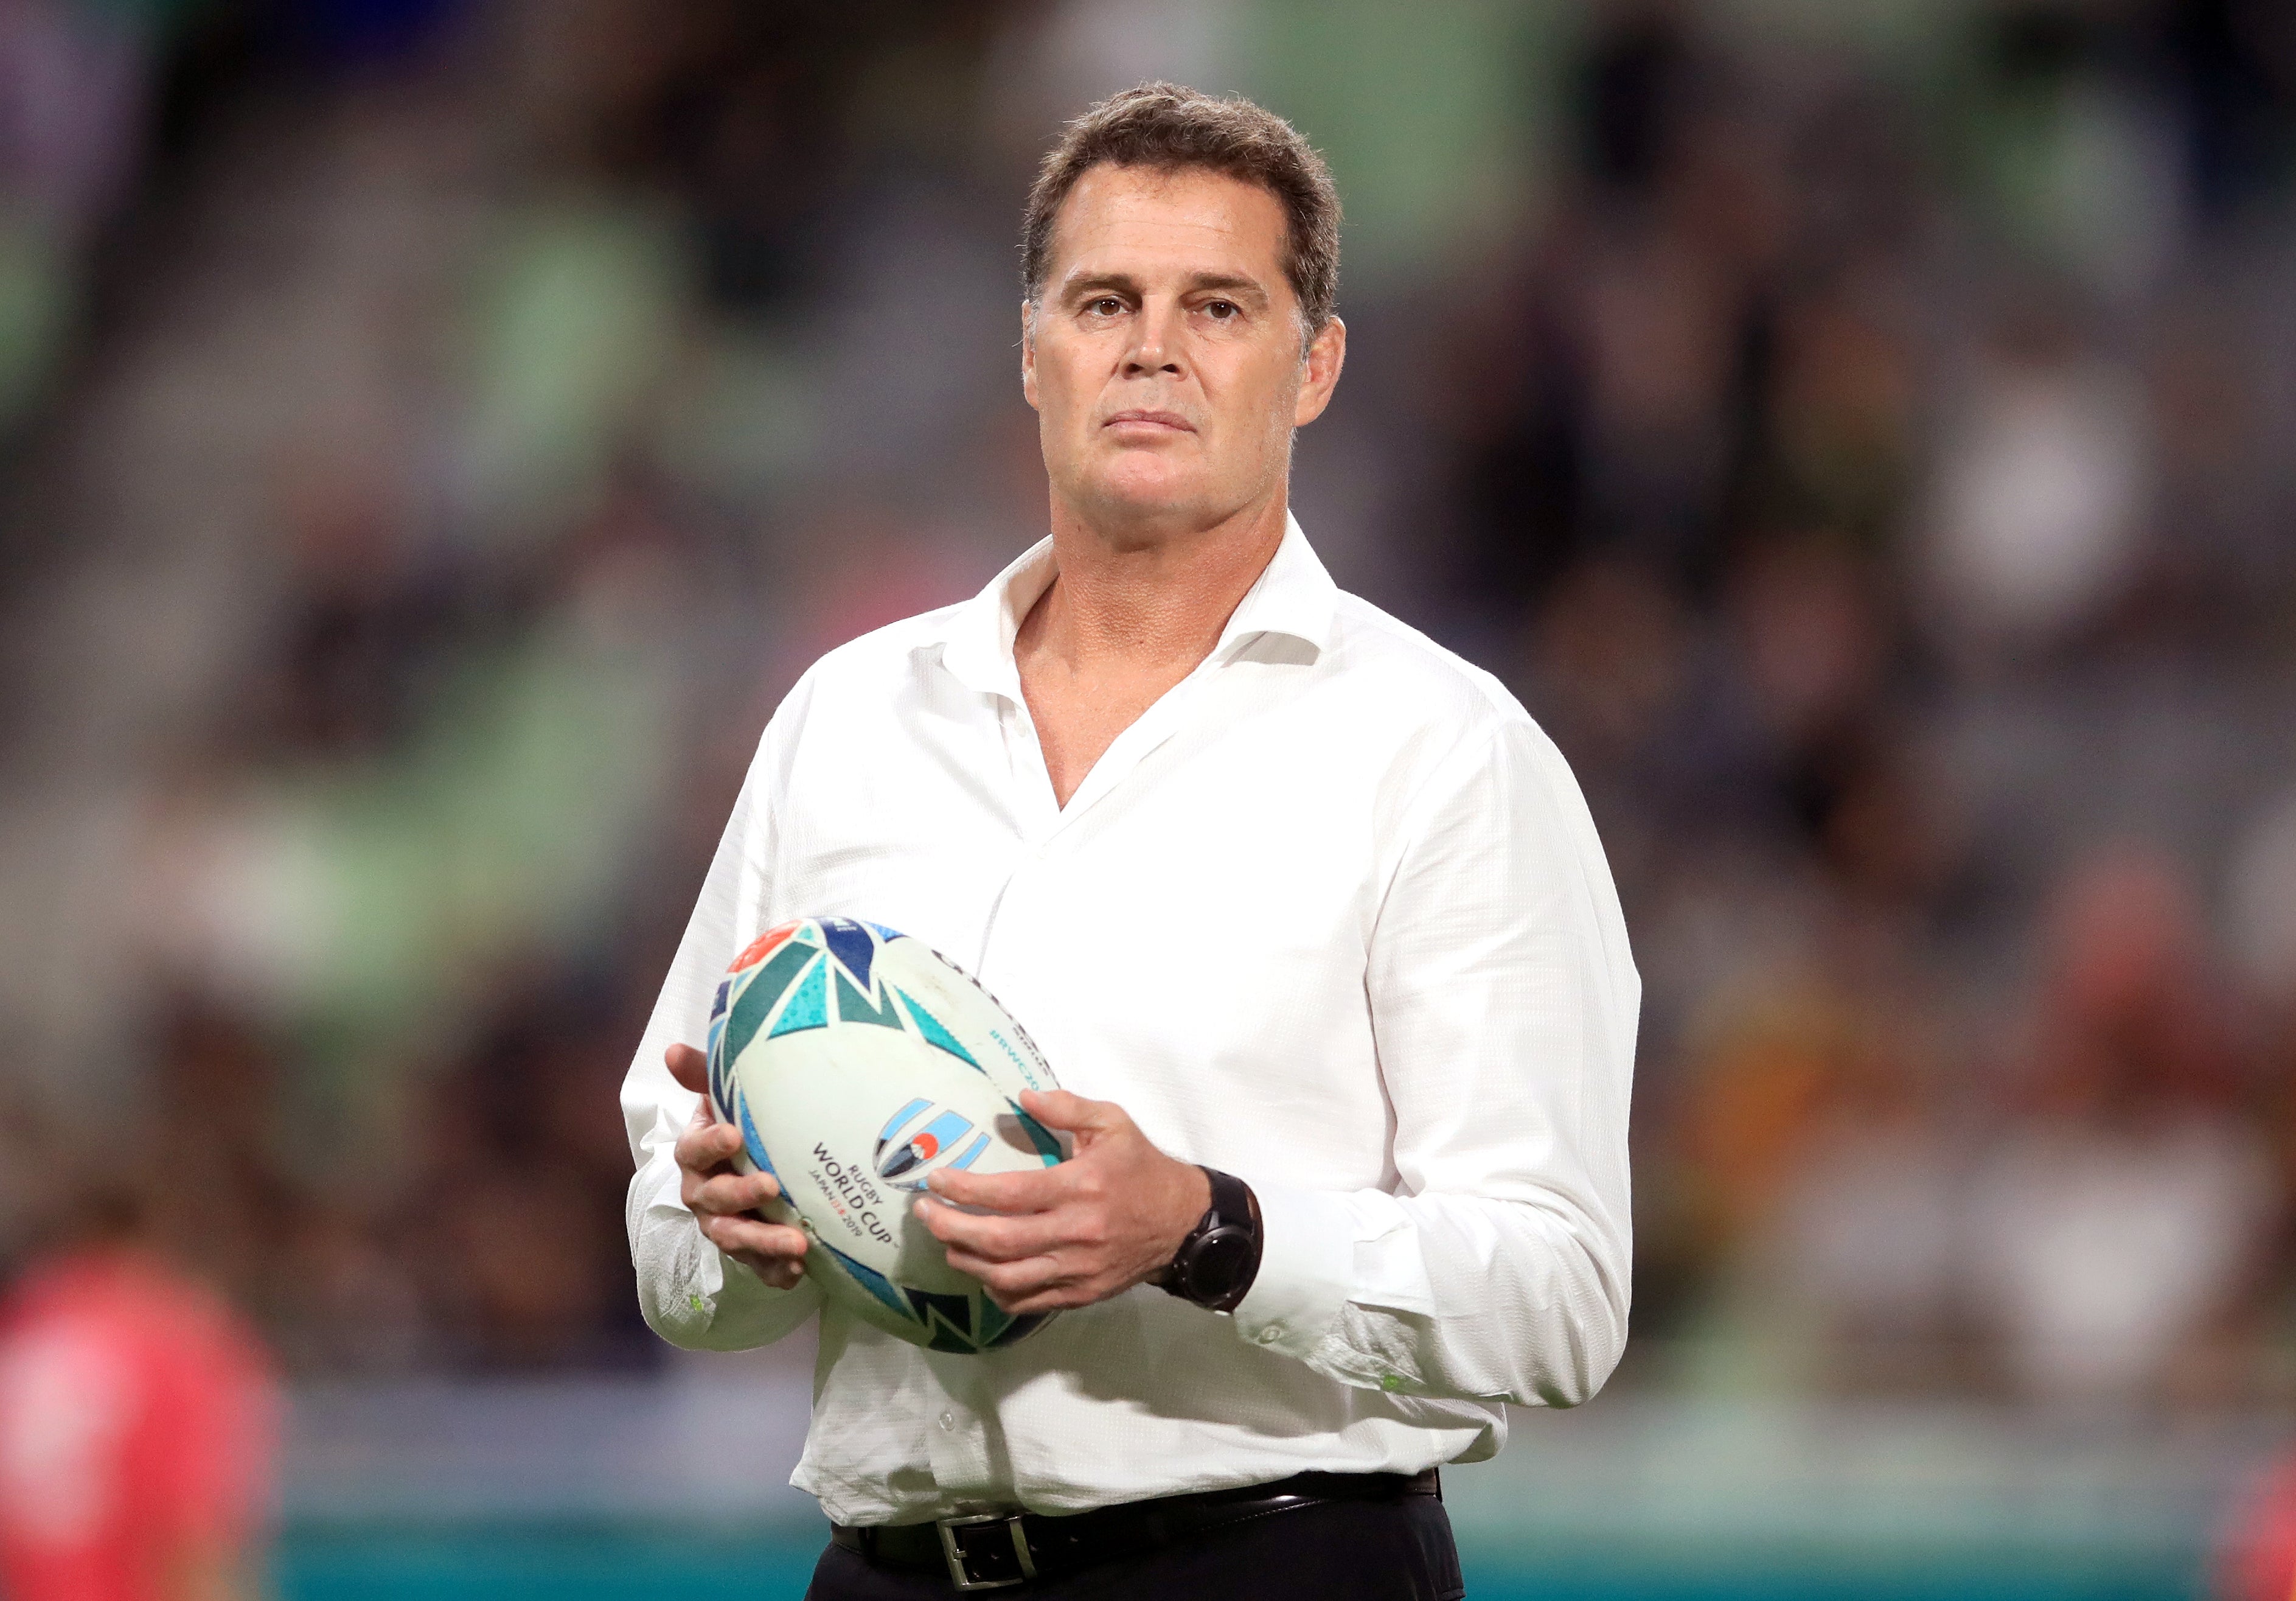 South Africa boss Rassie Erasmus has been banned from all rugby activity for two months